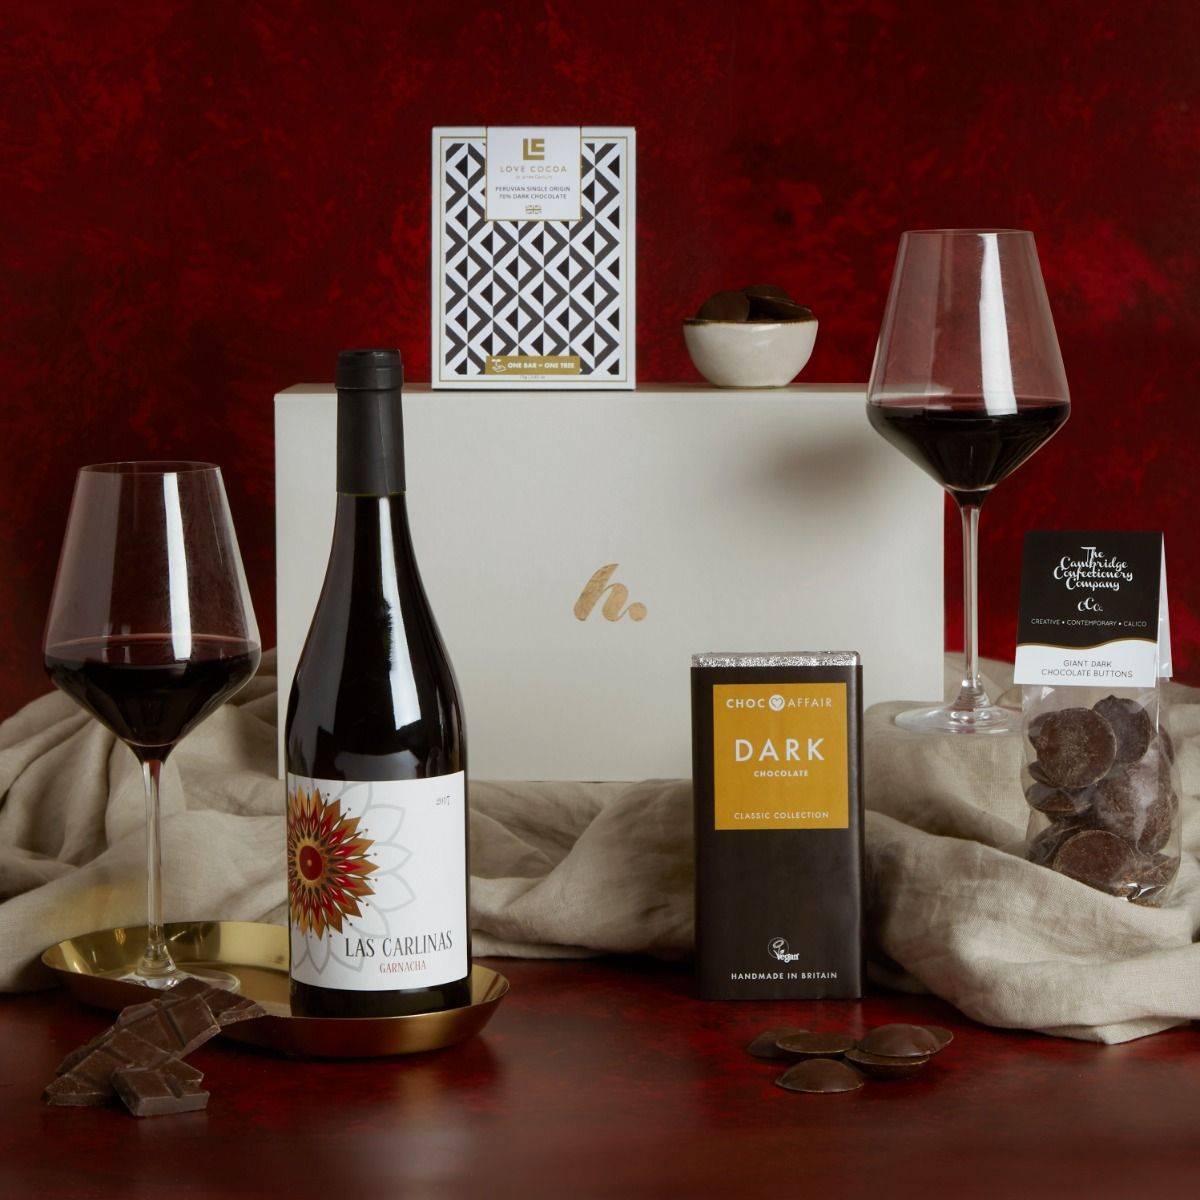 Red wine & dark chocolate gift box with contents on display